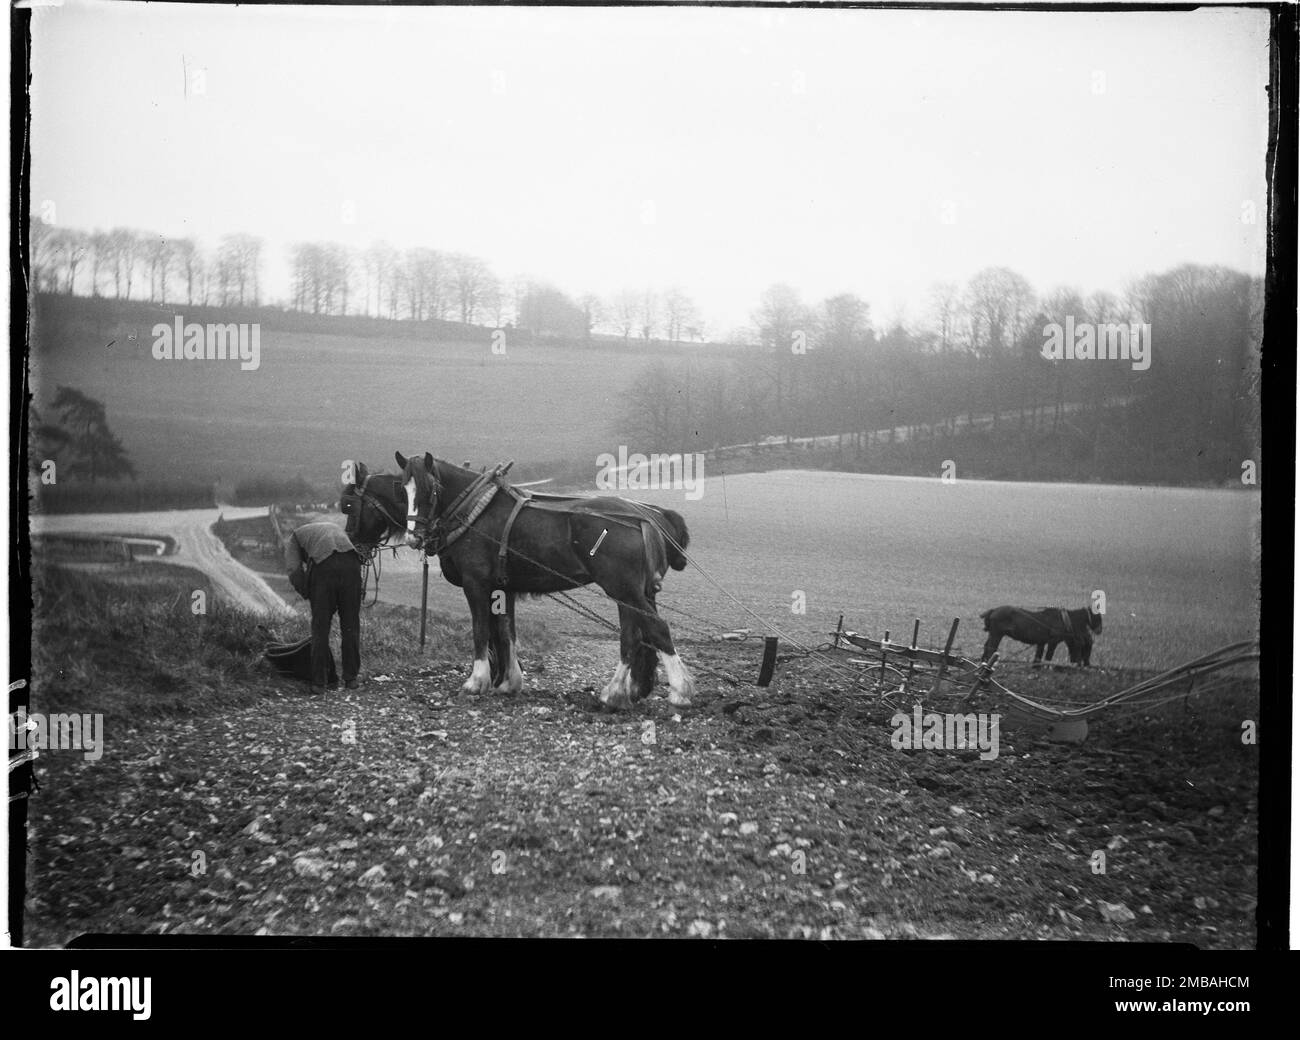 Courthill Farm, Nore Wood Lane, Slindon, Arun, West Sussex, 1908. A view from a hillside by Courthill Farm, showing a man in the foreground with two horses hitched to a plough and a second pair of horses further down the hill. The photograph appears to have been taken during a break in ploughing. The man may be about to feed the horses from a bag. Stock Photo